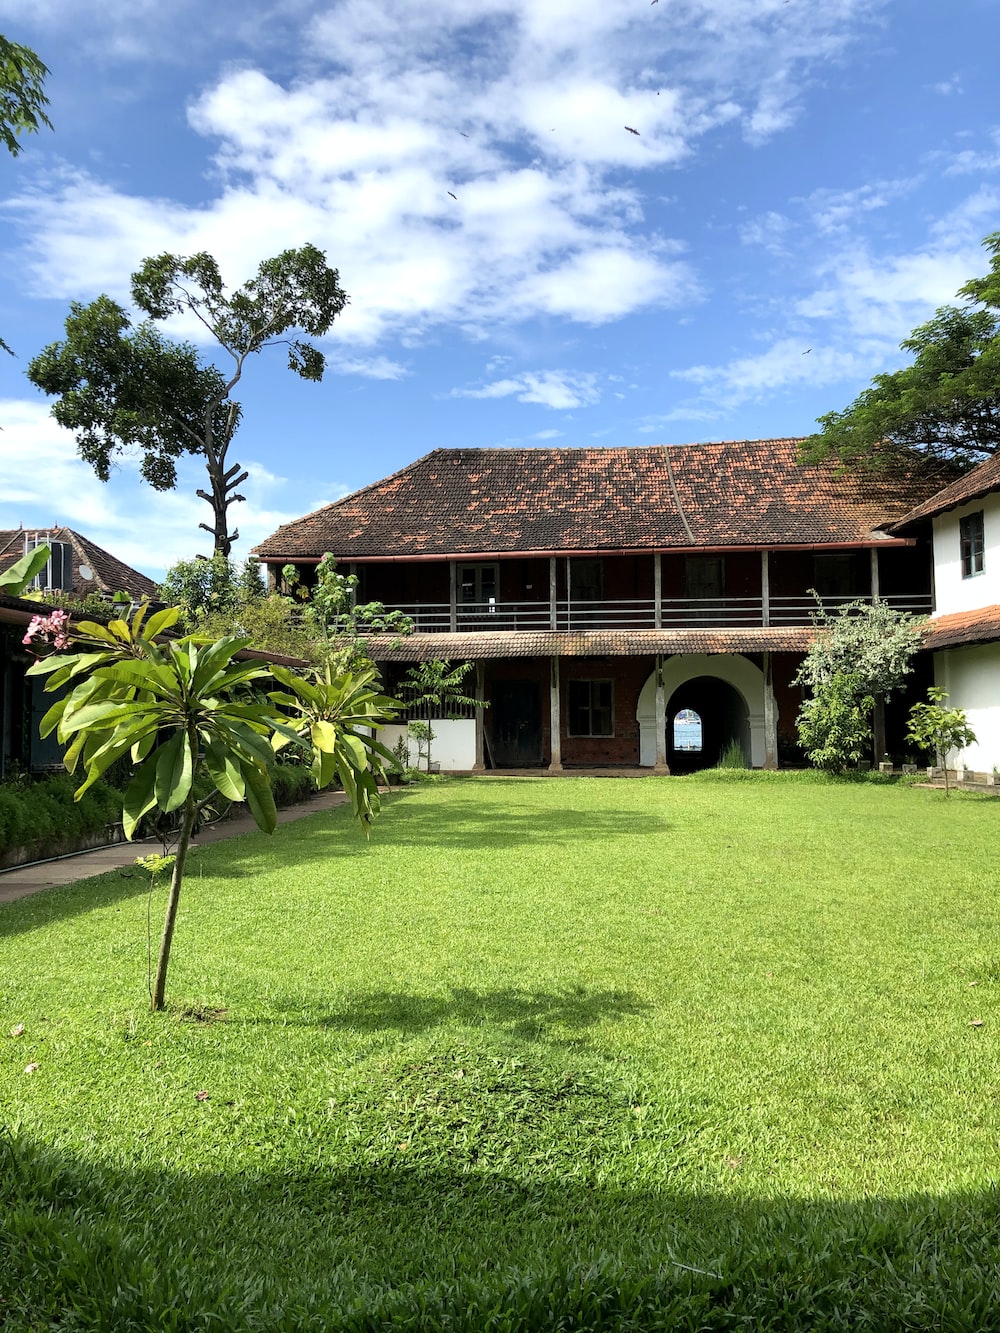 Kerala House Picture. Download Free Image